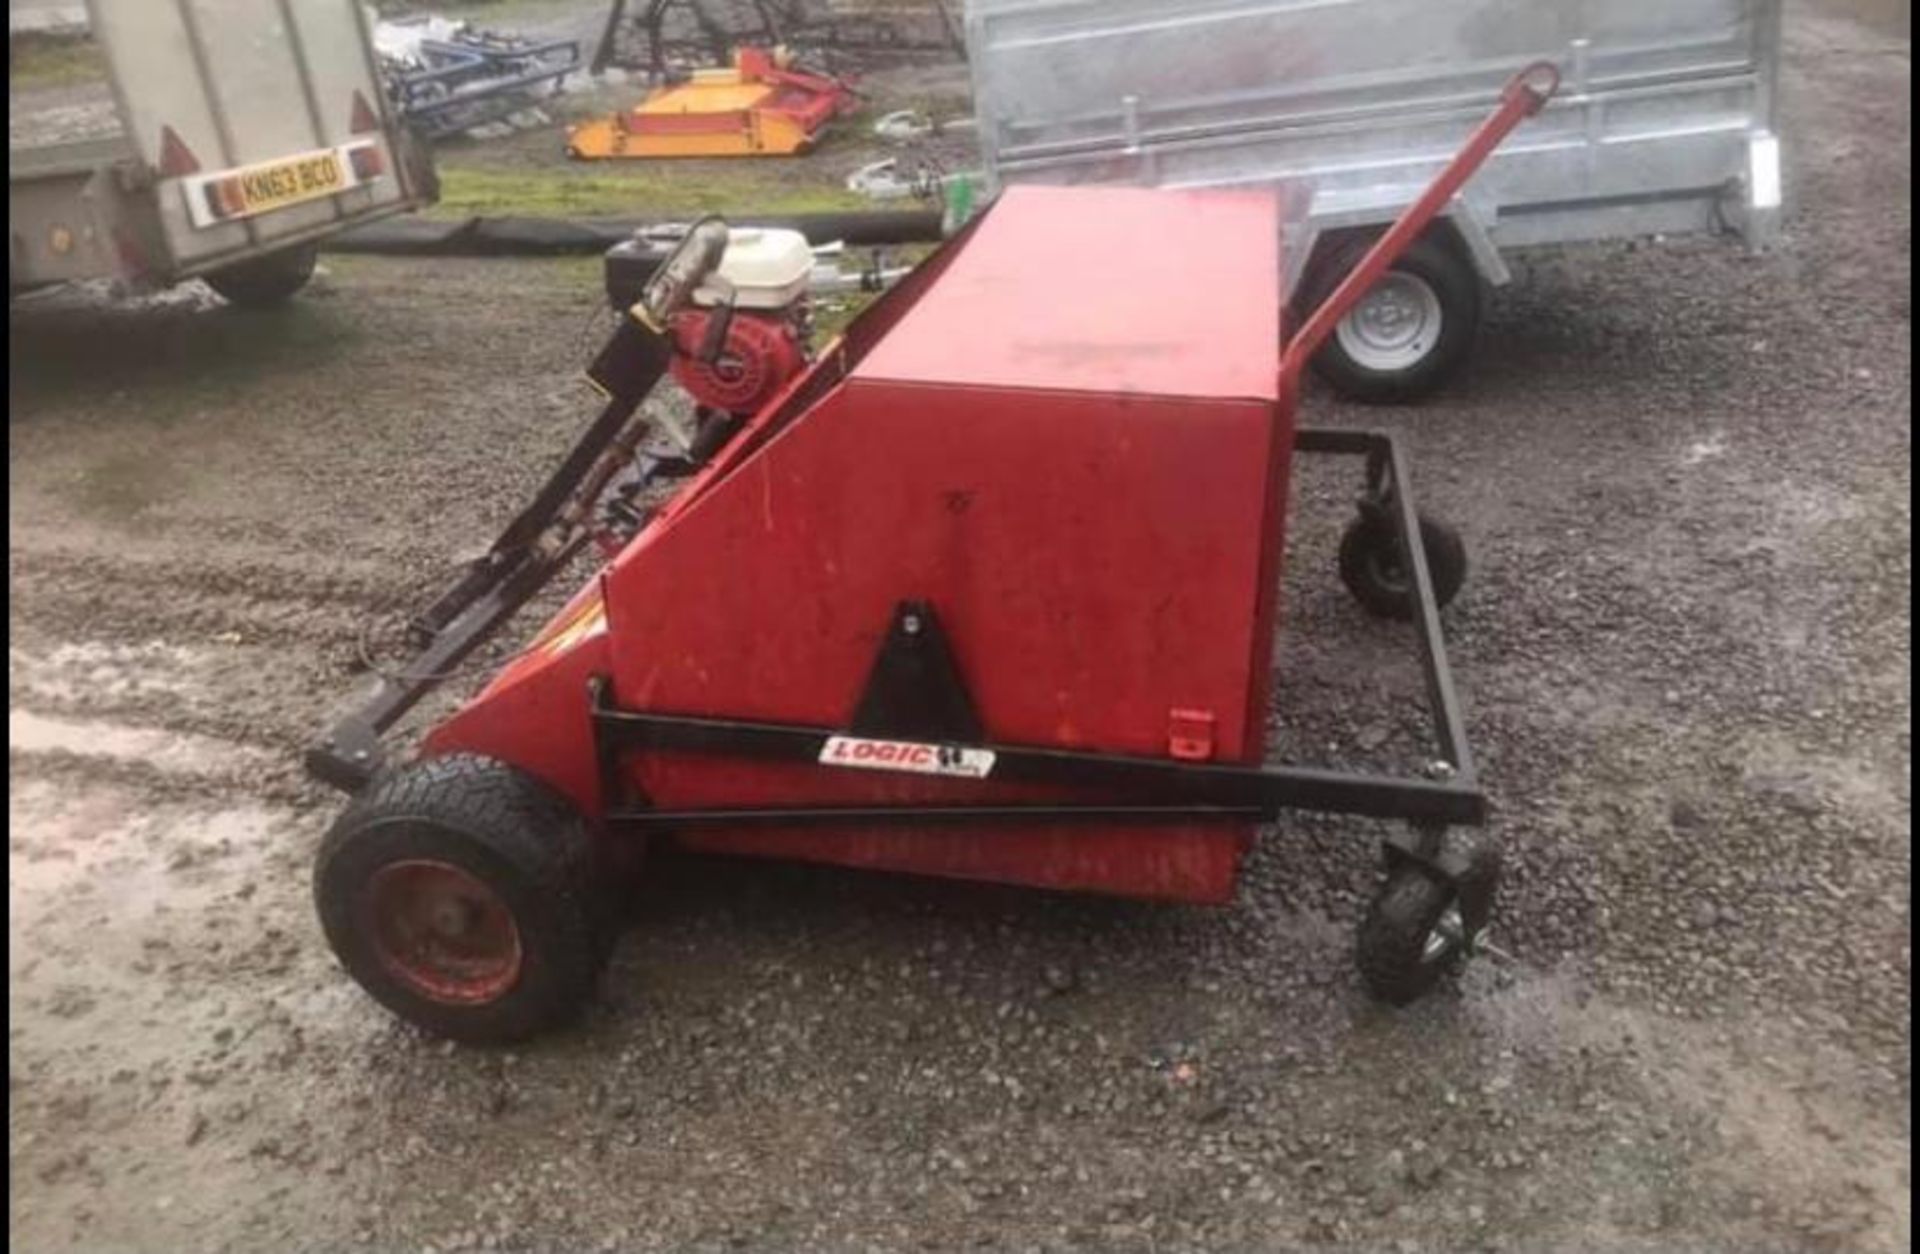 LOGIC TOWBEHIND SWEEPER, RUNS AND WORKS, CLEAN MACHINE, GOOD CONDITION, SUITABLE FOR ATV *NO VAT* - Image 3 of 3